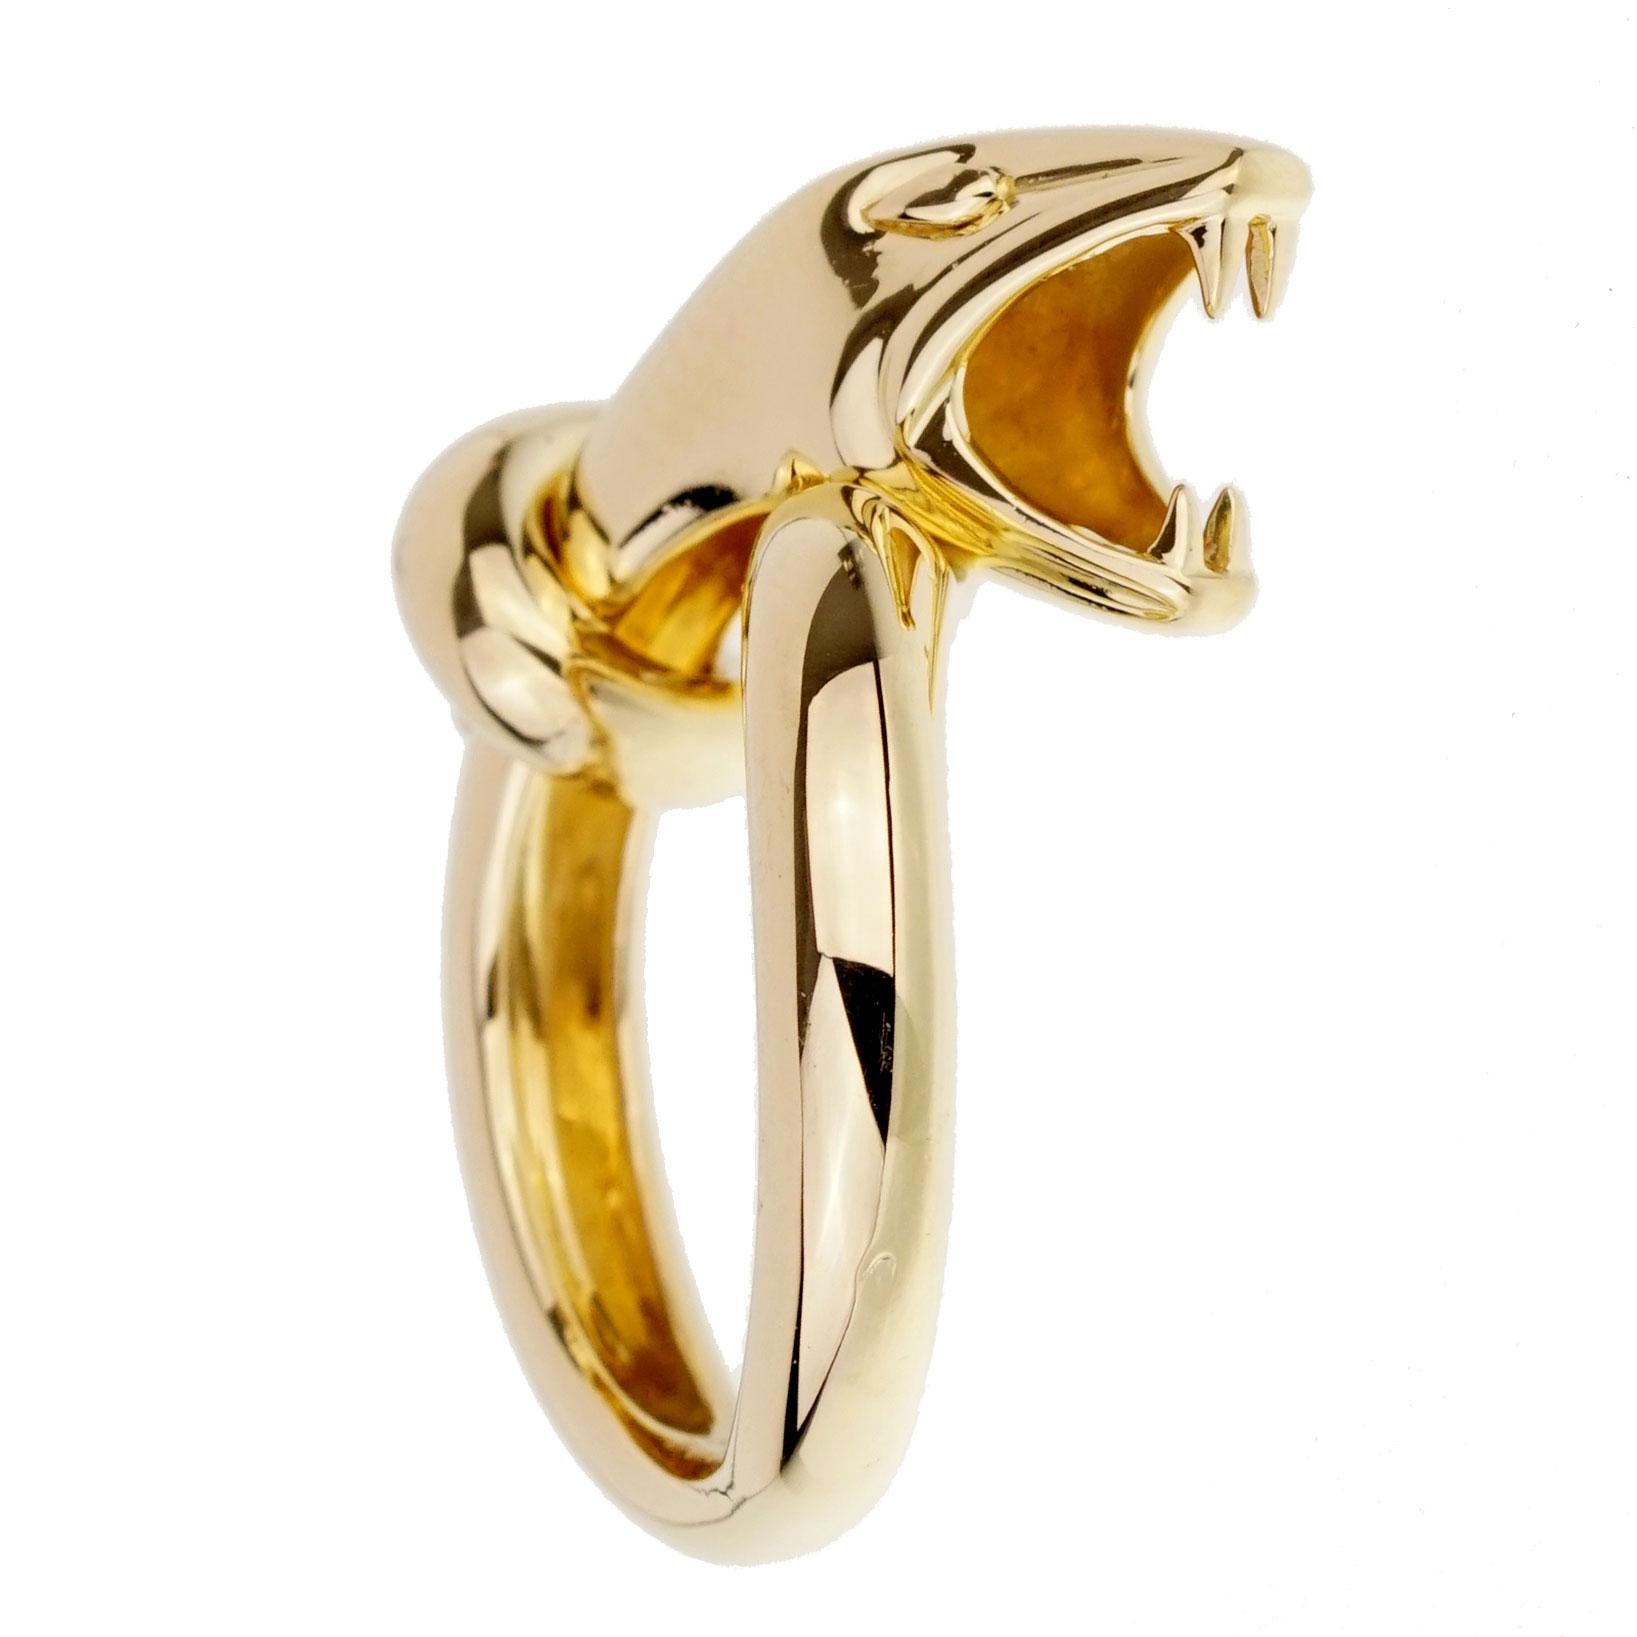 Show off your wild side with this strikingly chic Boucheron snake ring crafted in 18k yellow gold. This fabulous snake motif ring by Boucheron measures a size 5 and can be resized.